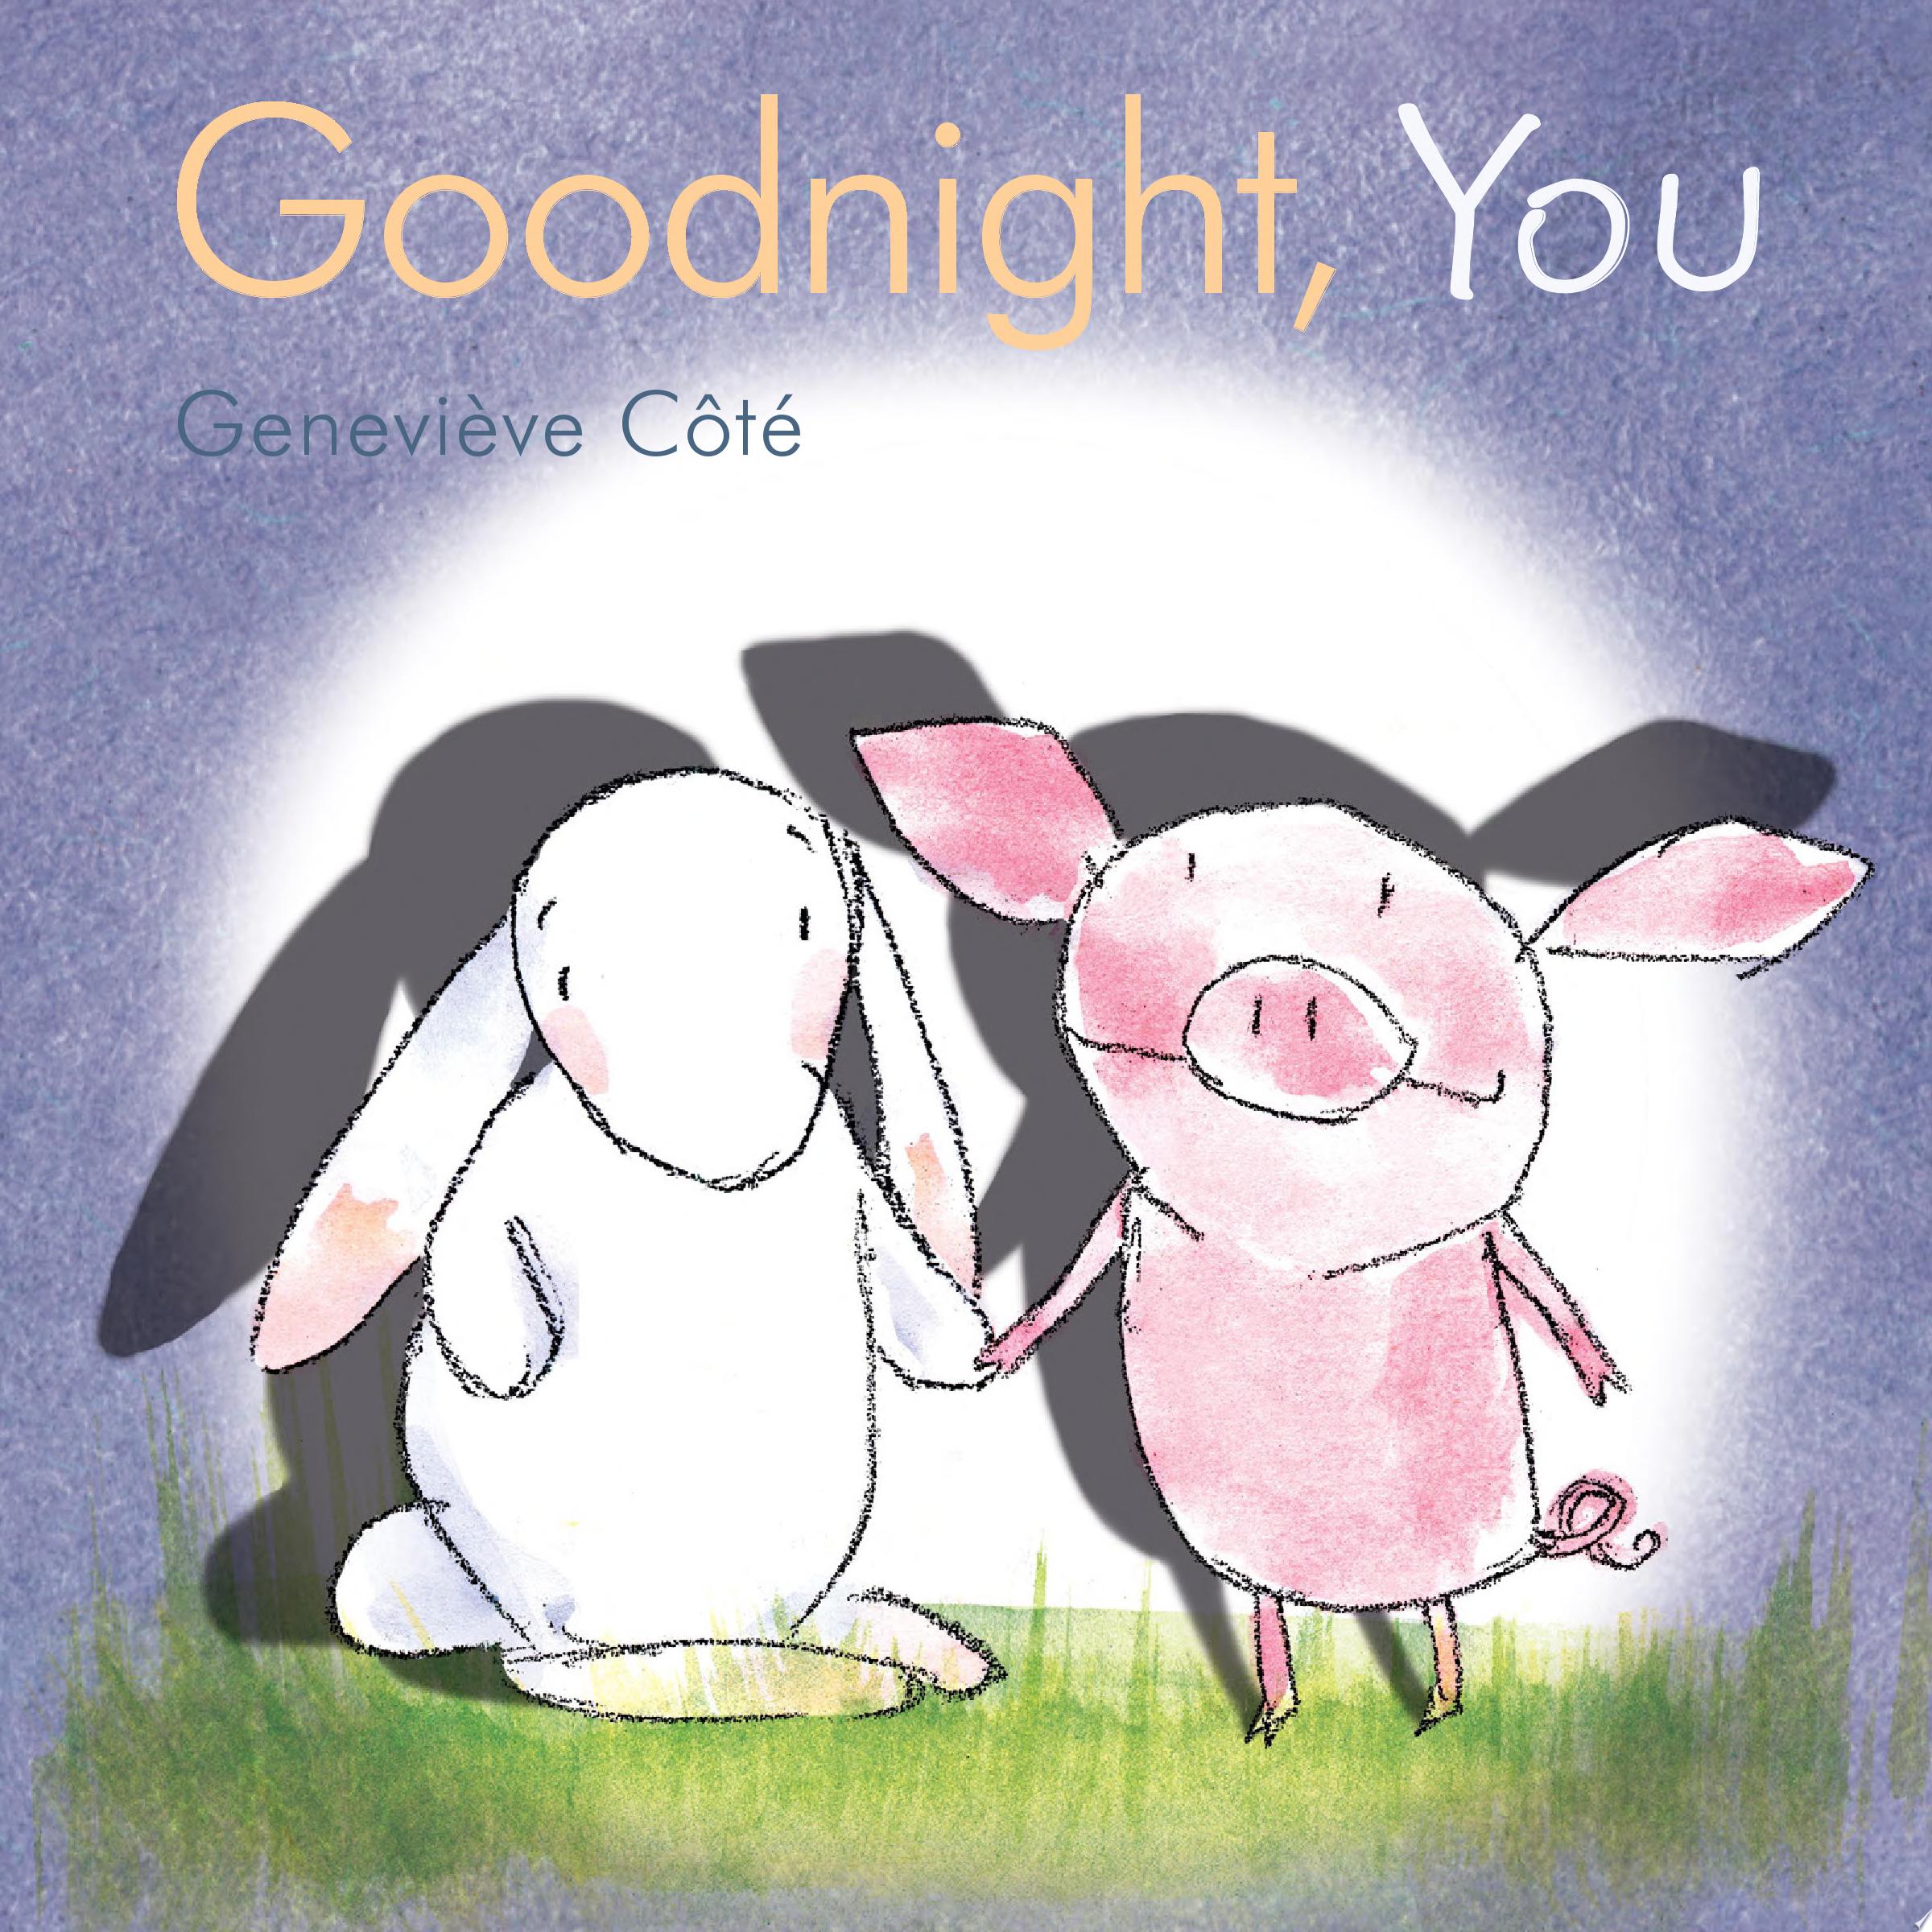 Image for "Goodnight, You"